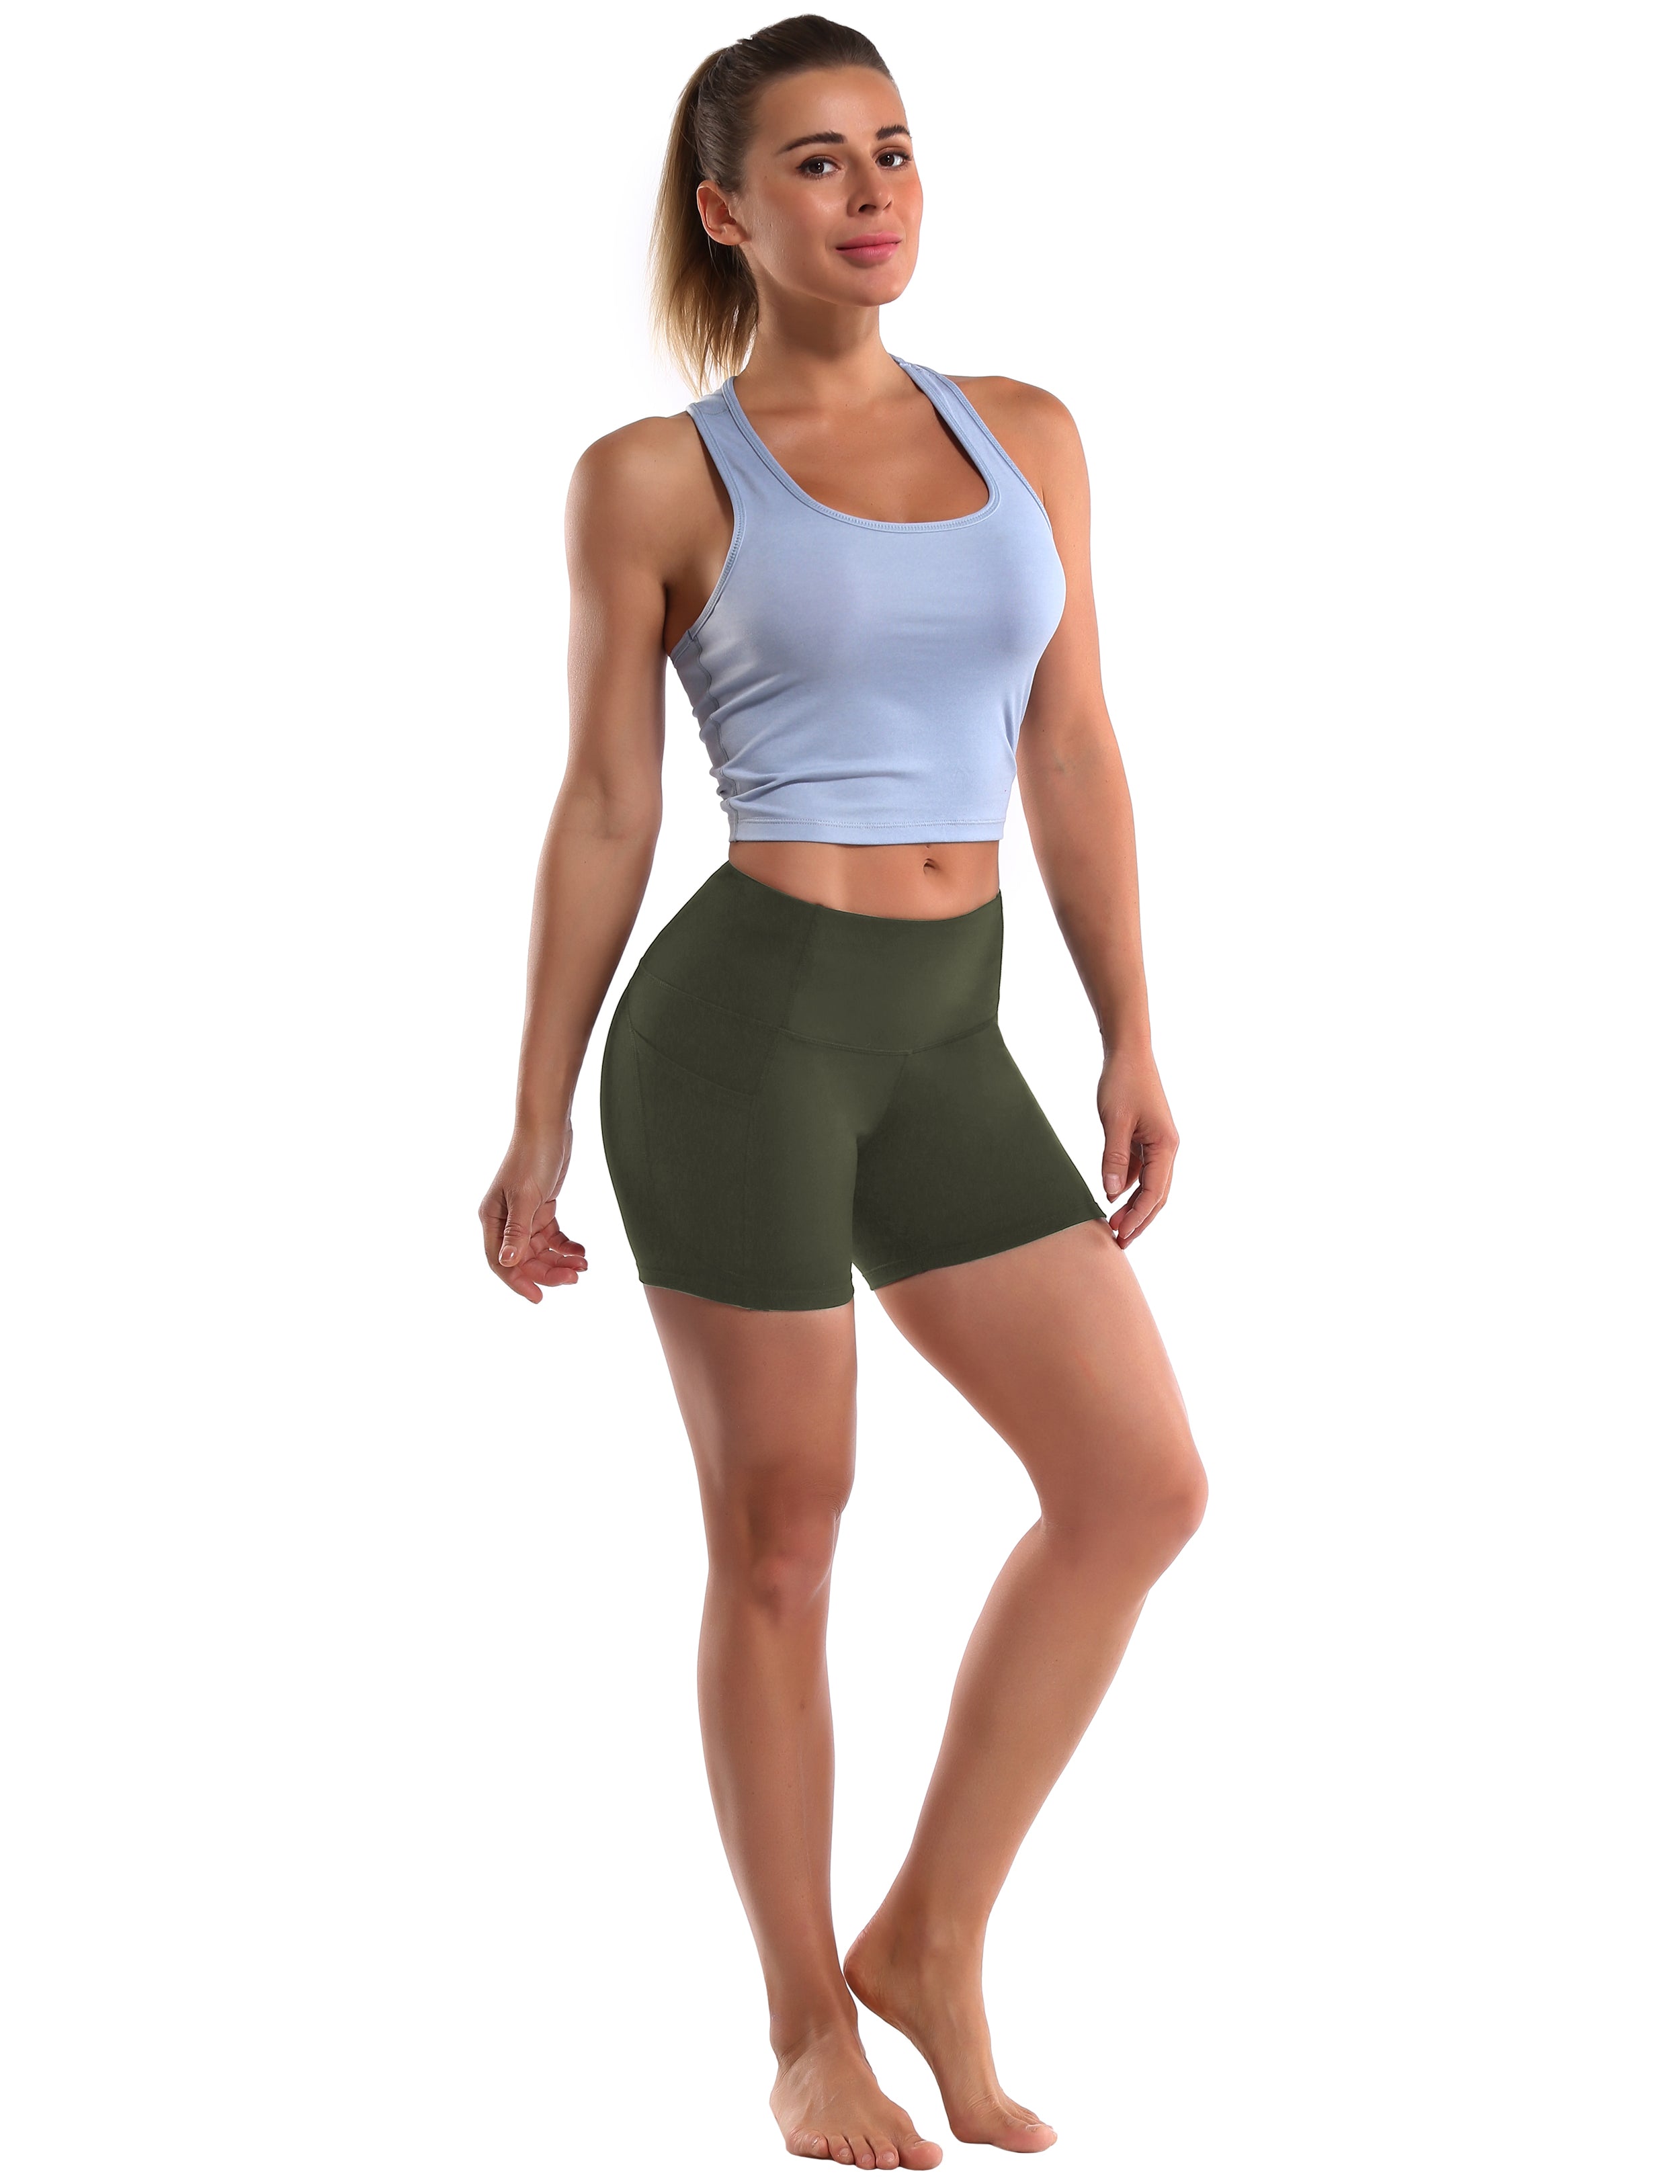 High Waist Side Pockets Yoga Shorts green Softest-ever fabric High elasticity 4-way stretch Fabric doesn't attract lint easily No see-through Moisture-wicking Machine wash 88% Nylon, 12% Spandex